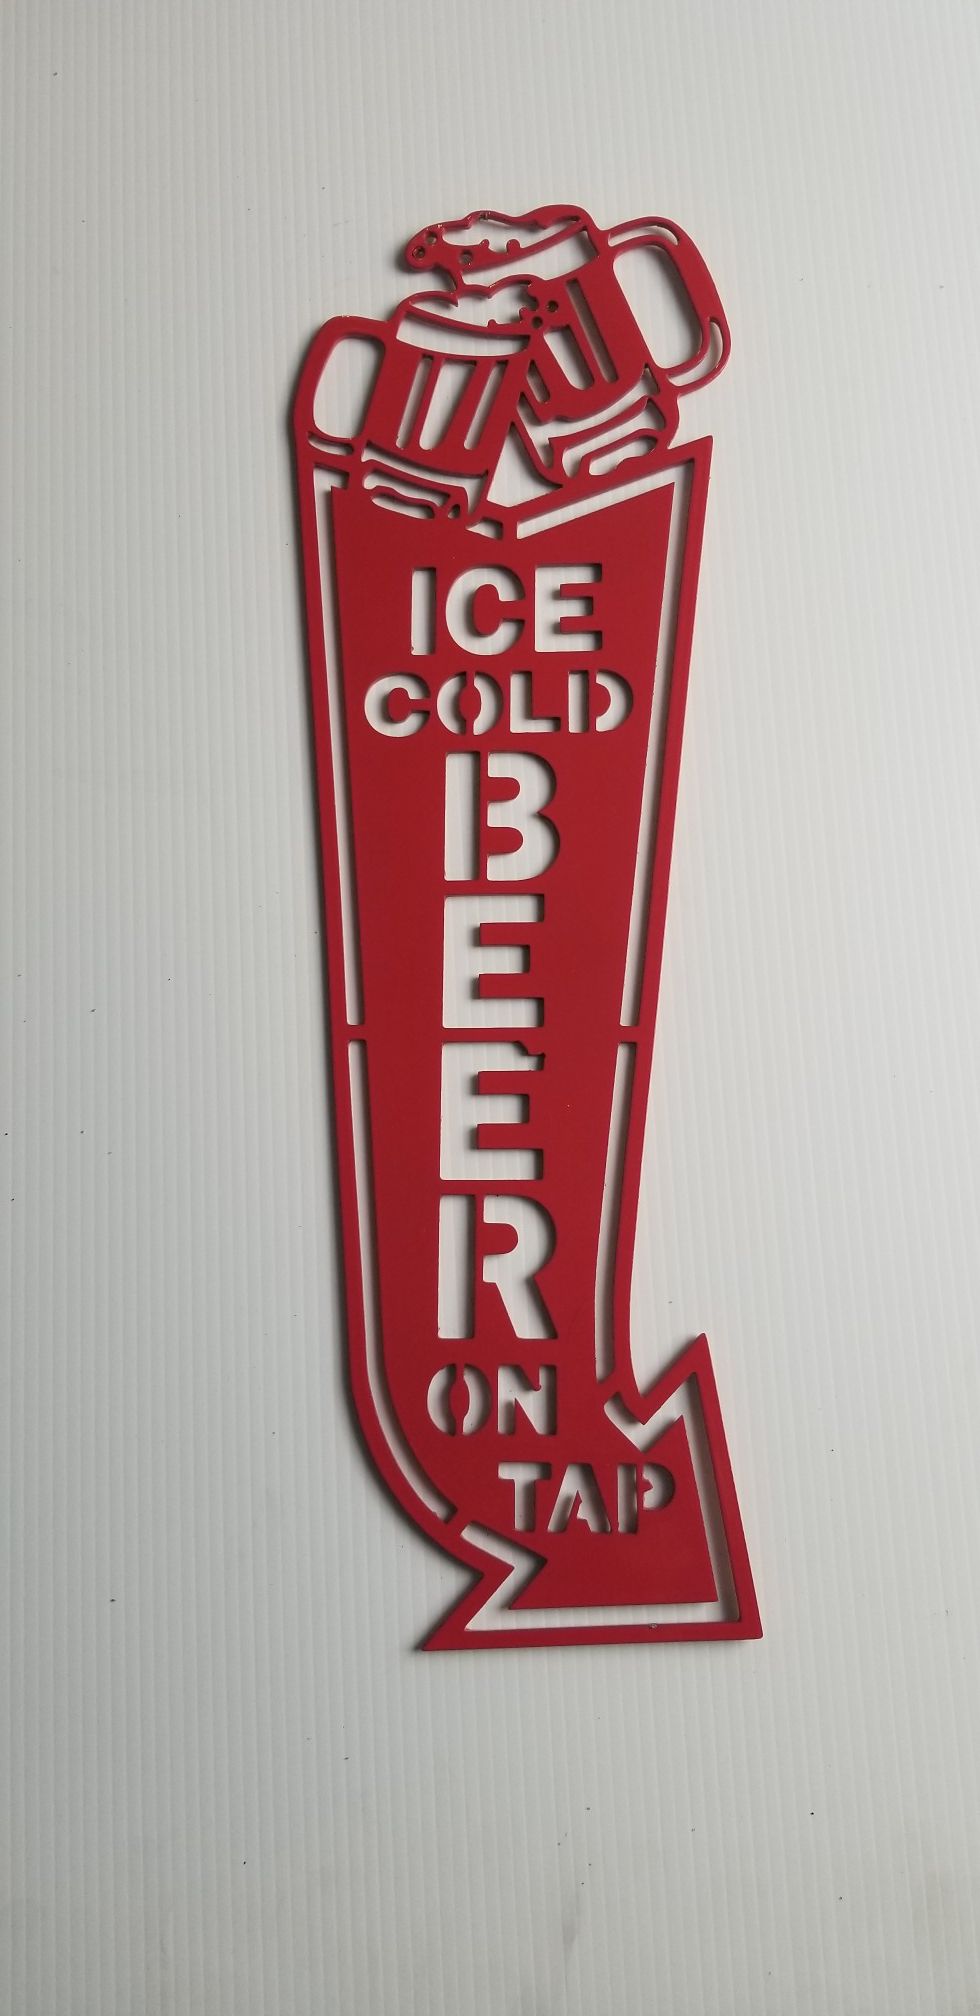 Ice Cold Beer On Tap CNC Plasma Cut Wal Art Man Cave Sign